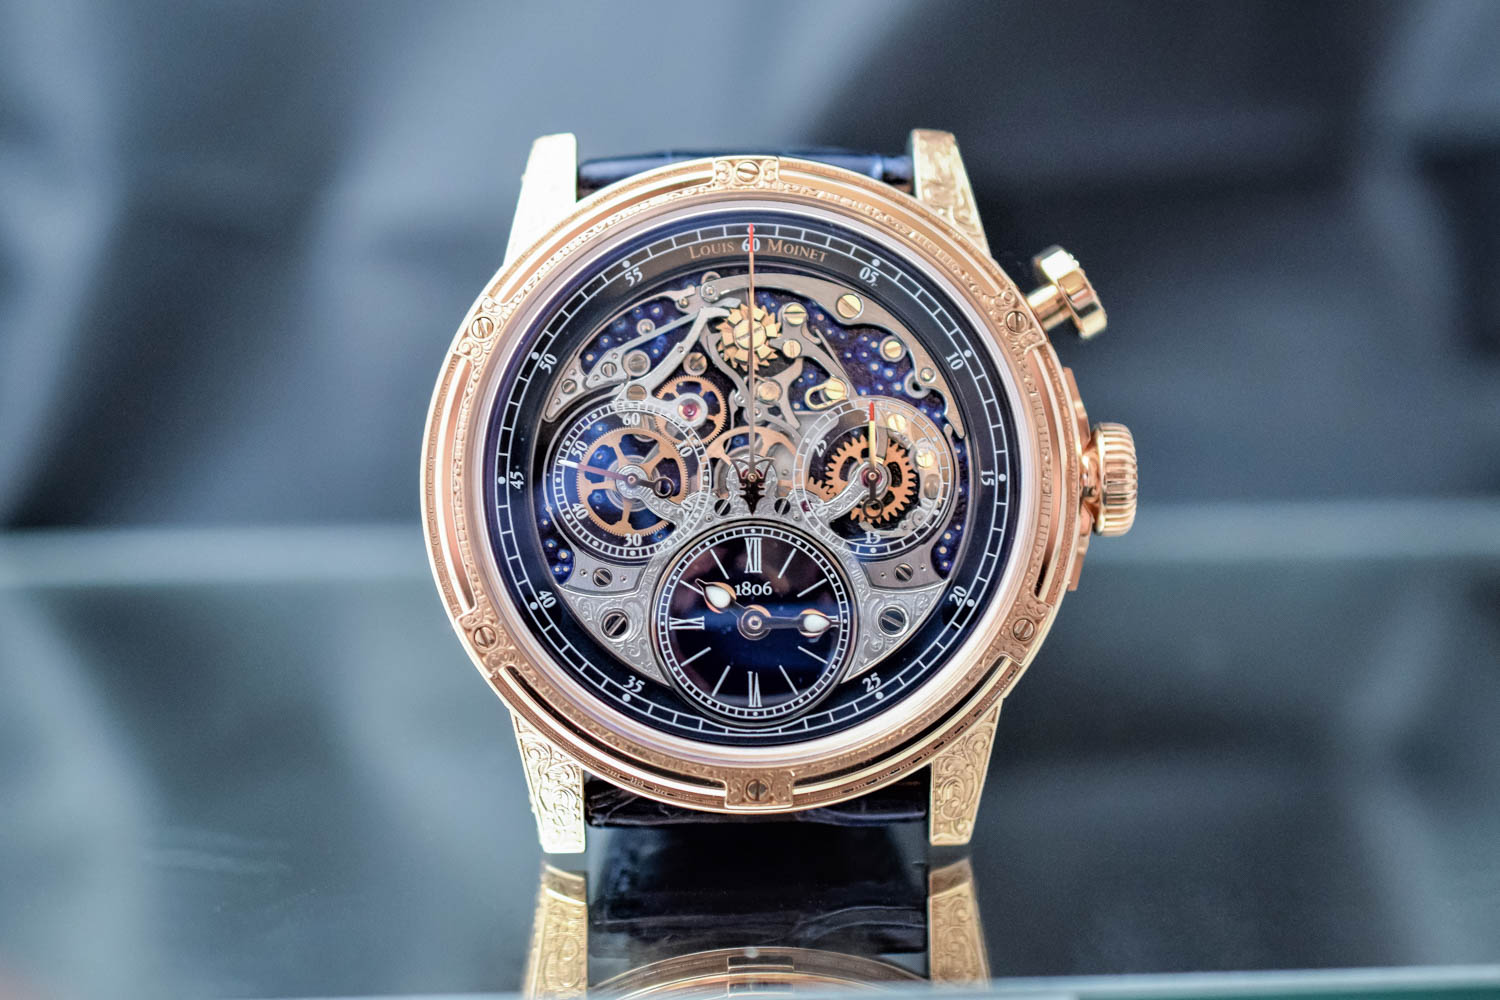 Louis Moinet Memoris ‘Red Eclipse’ Chronograph Engraved Pink Gold - Hands-On (Specs & Price)